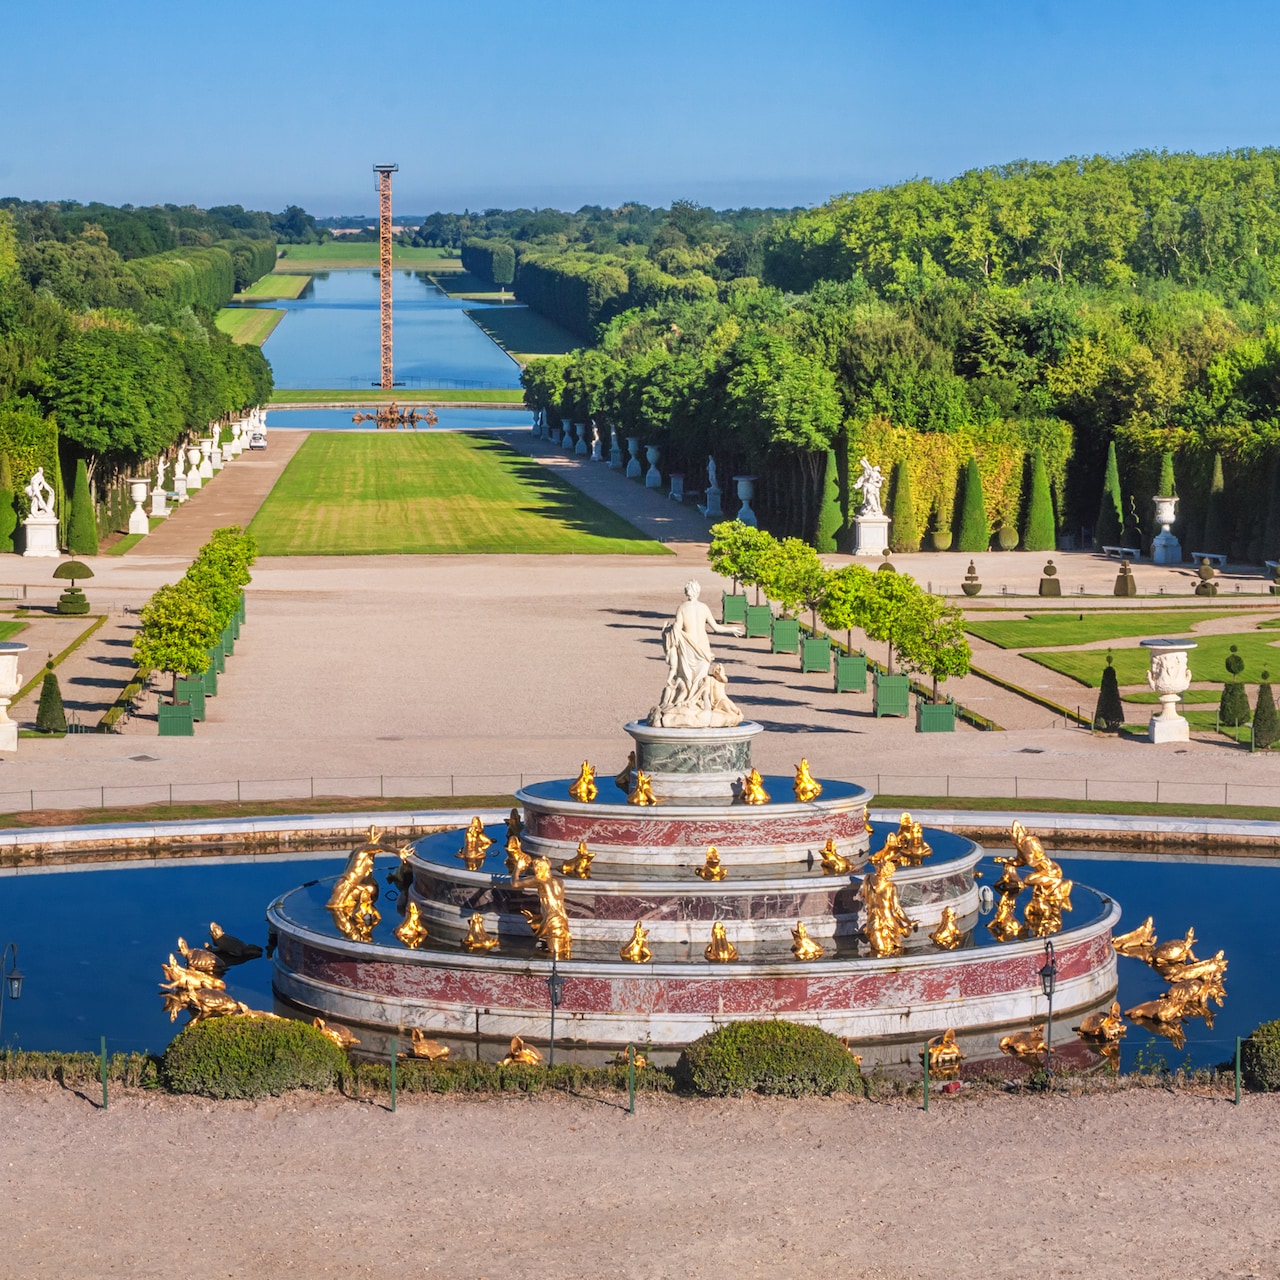 Latona Fountain overlooking an expanse of lawn in the gardens of Versailles